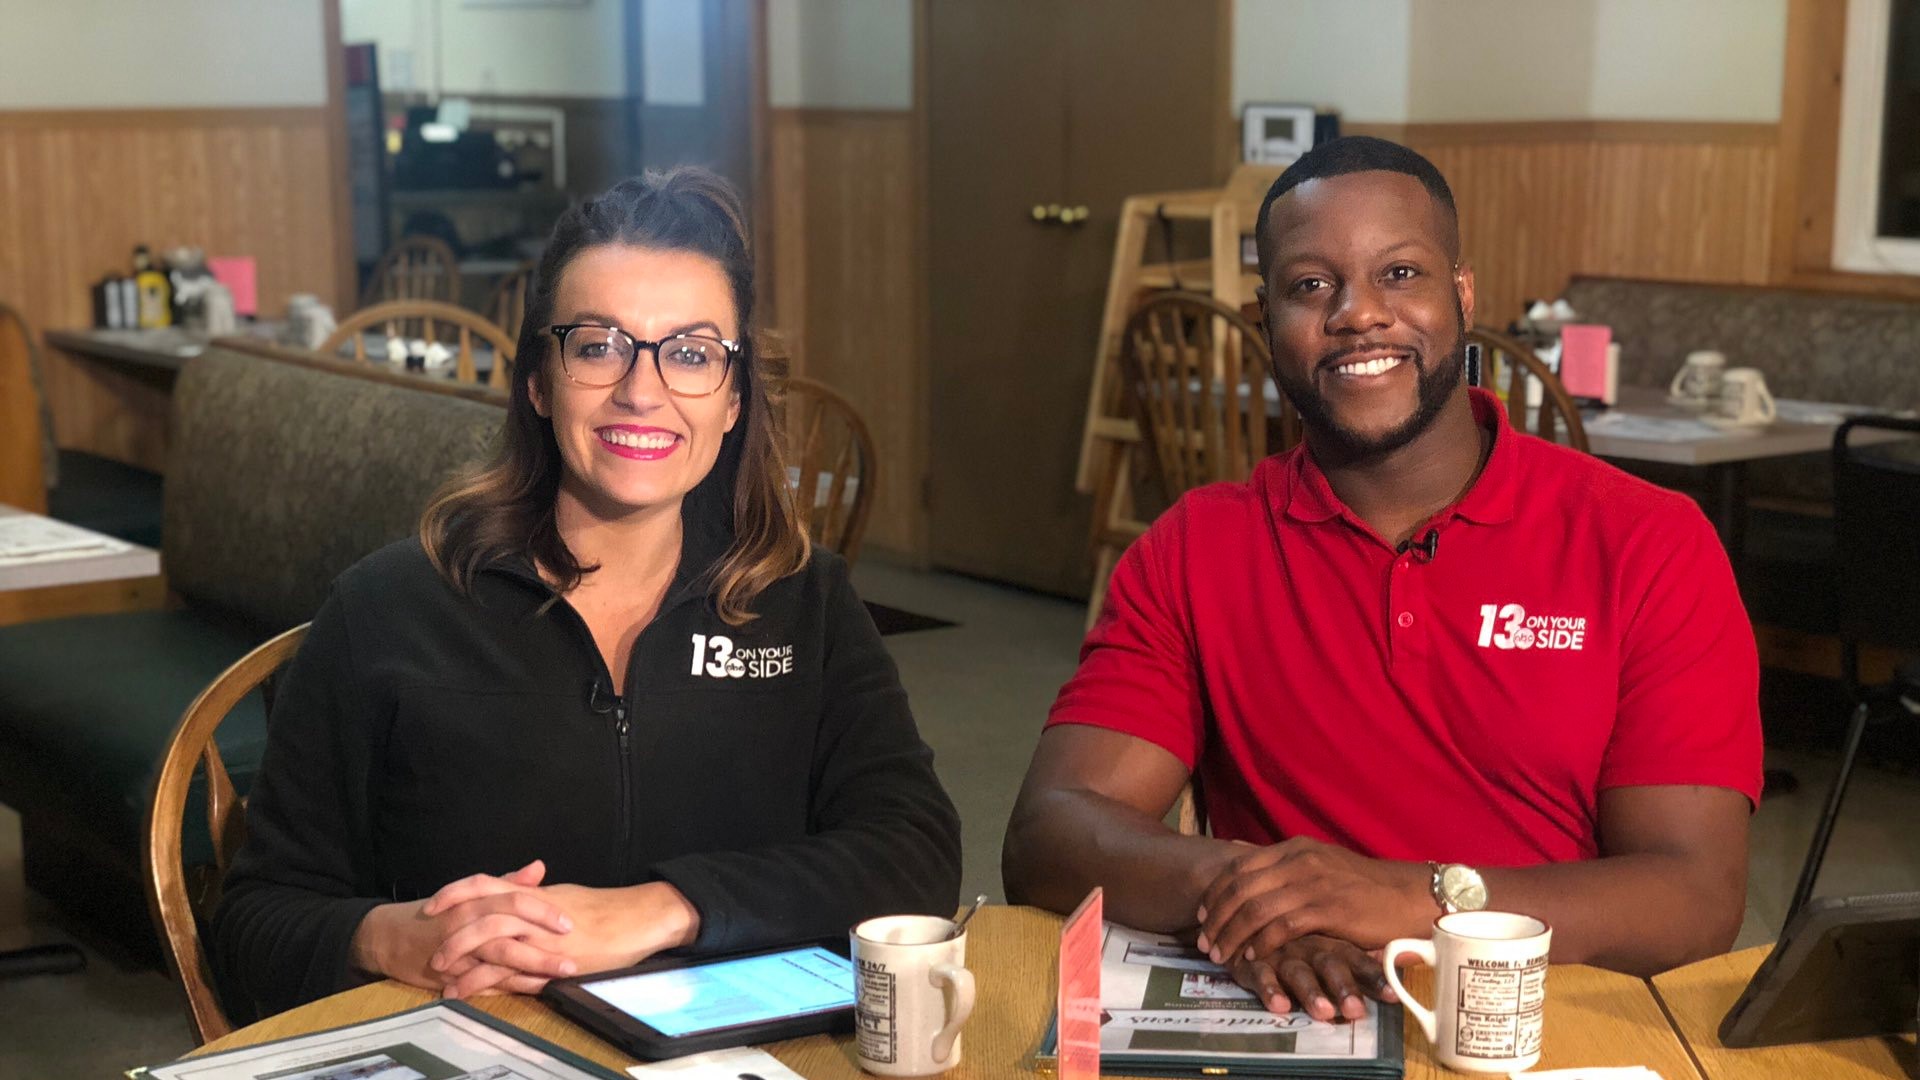 The 13 ON YOUR SIDE Mornings team spent the morning in Grand Haven at Rendezvous Family Diner for this week's edition of 13 In Your Neighborhood.